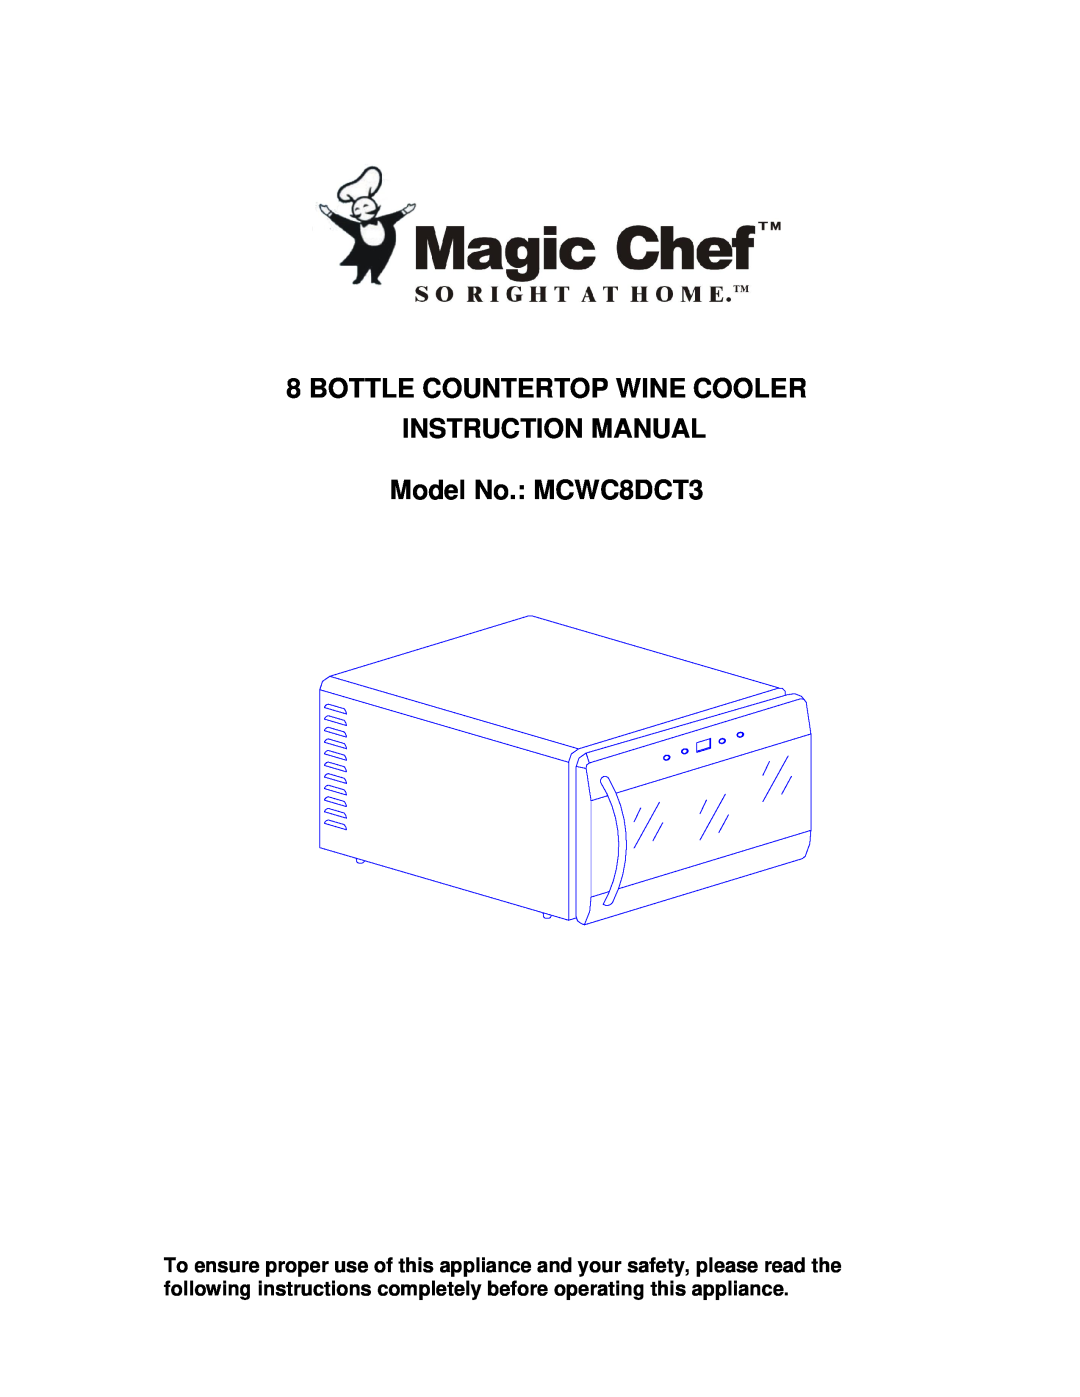 Magic Chef MCWC8DCT3 instruction manual Bottle Countertop Wine Cooler 